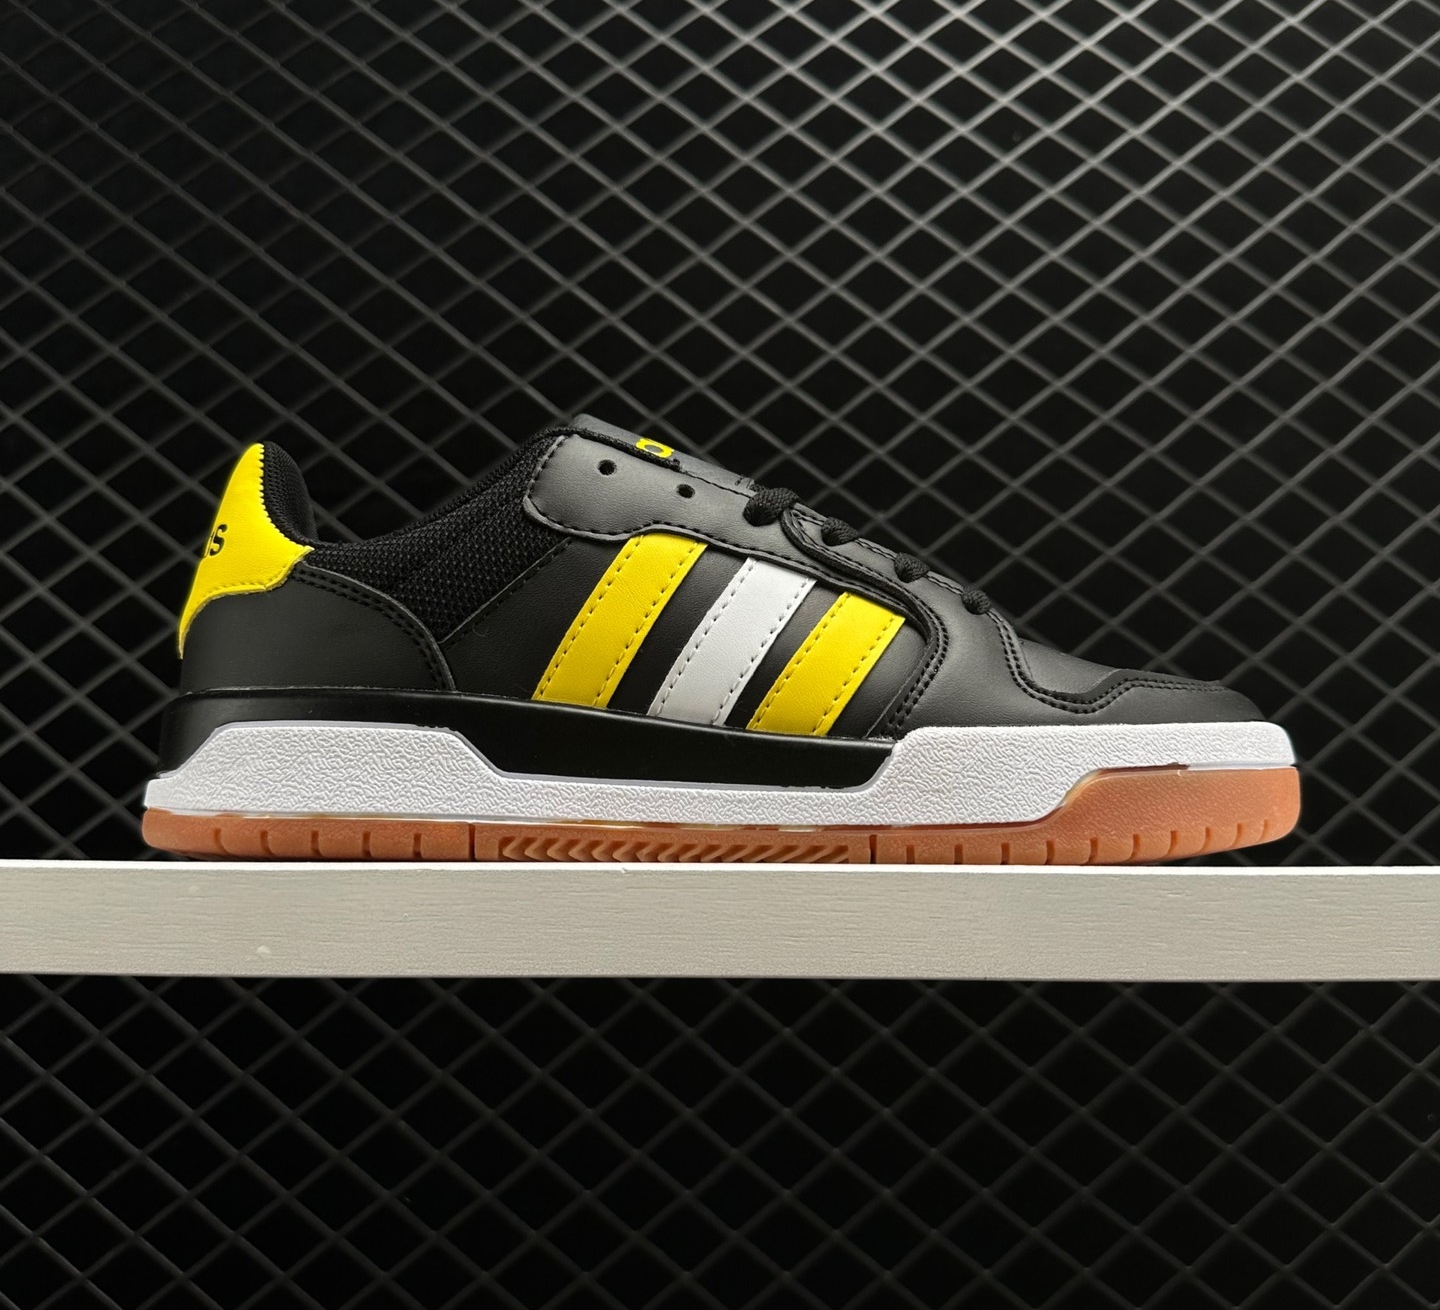 Adidas Neo Entrap Black Yellow White FY5642 – Stylish Sneakers for Every Outfit